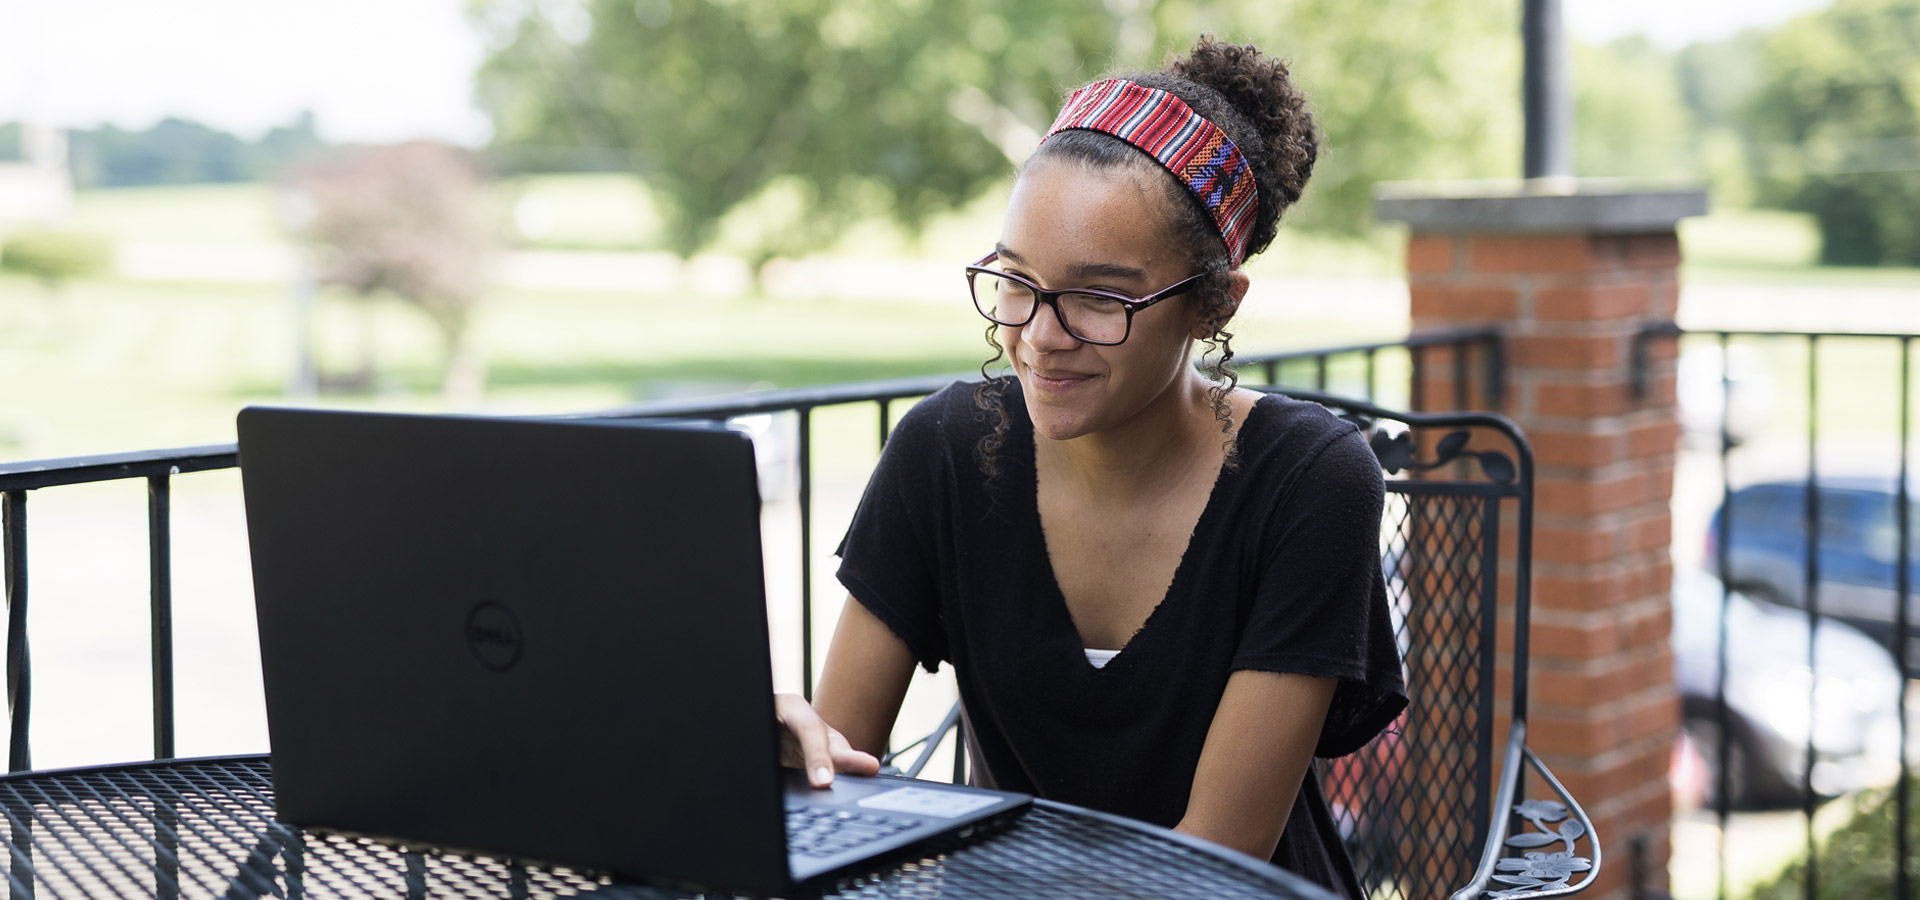 Student On Campus Outside with Laptop